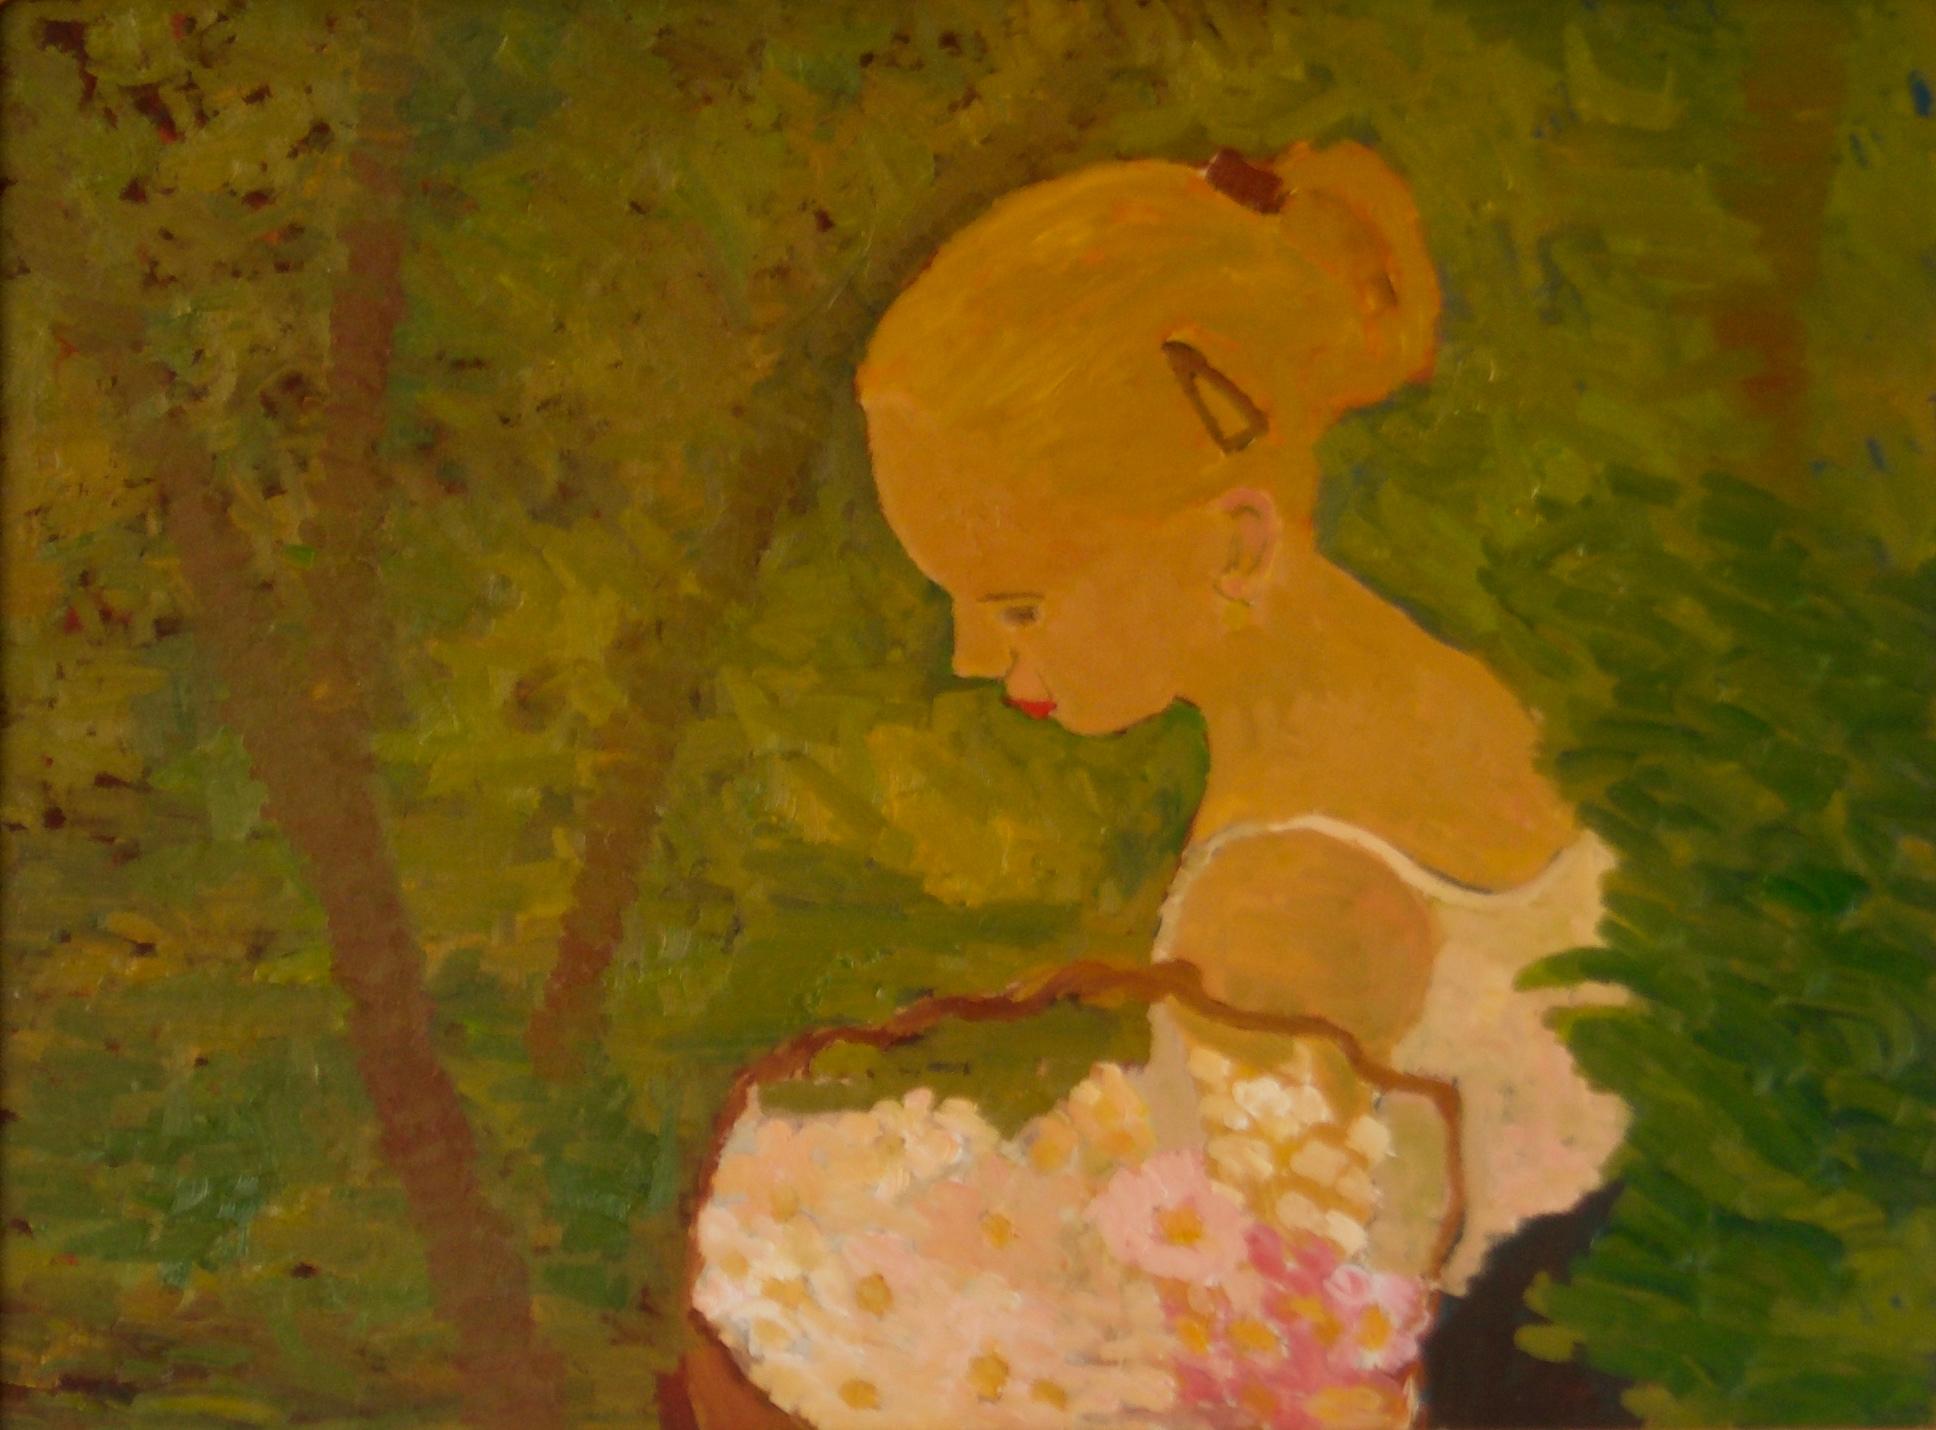 Alan Lambirth b 1959

RA Schools graduate
RA Schools student from 1980 to 1983

Piece is in a light wooden frame.

Keywords: young woman, flowers, outside, park, green, field, fields, tree, trees, blonde, hairclip, bouquet, picking, pick, white,